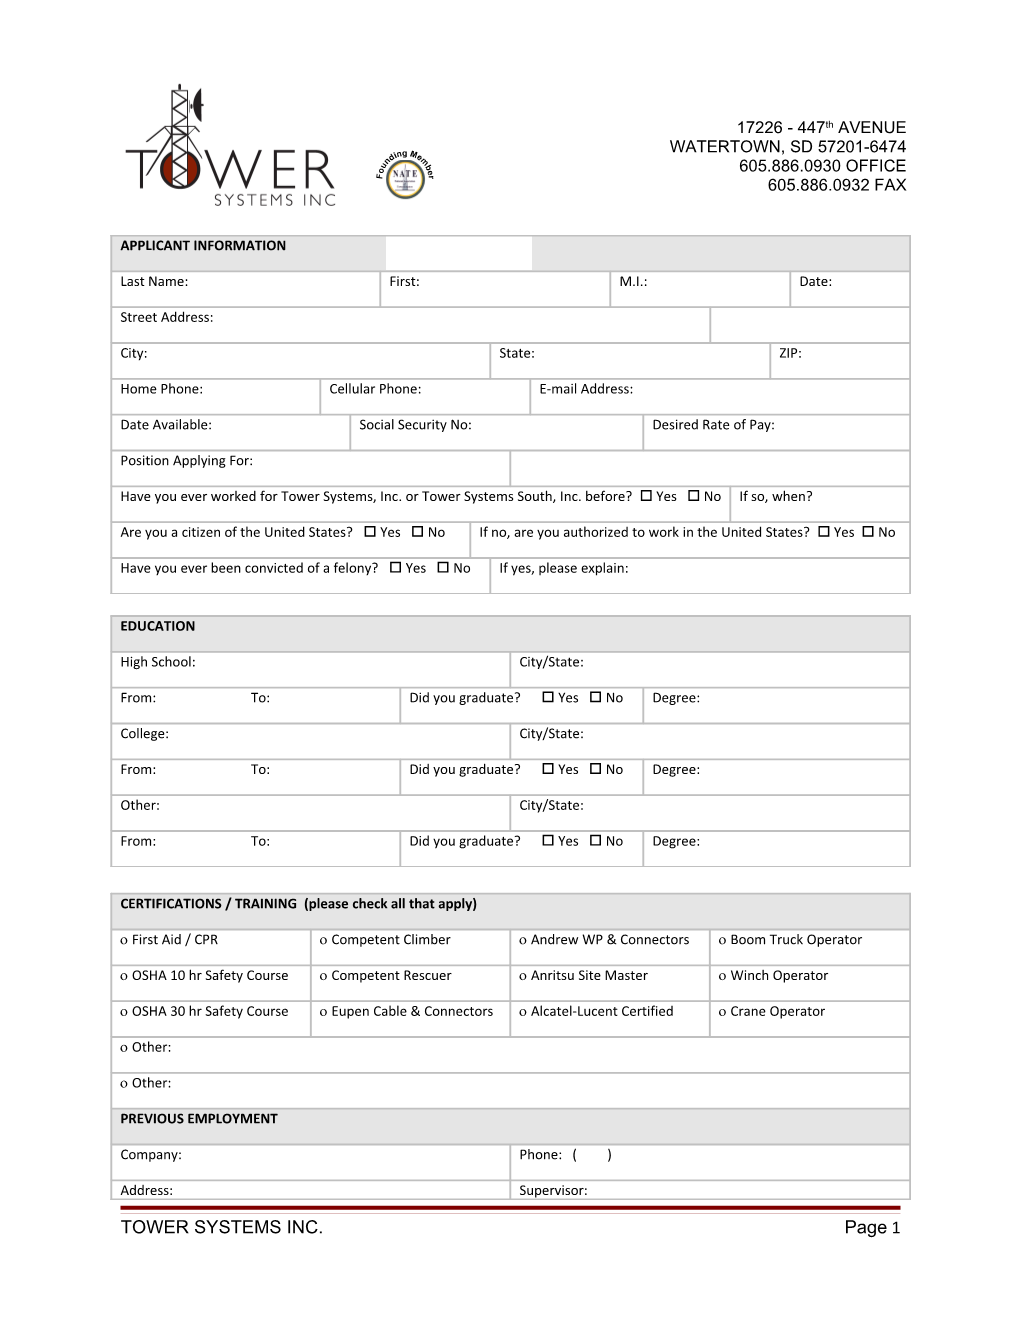 TOWER SYSTEMS INC. Page 1